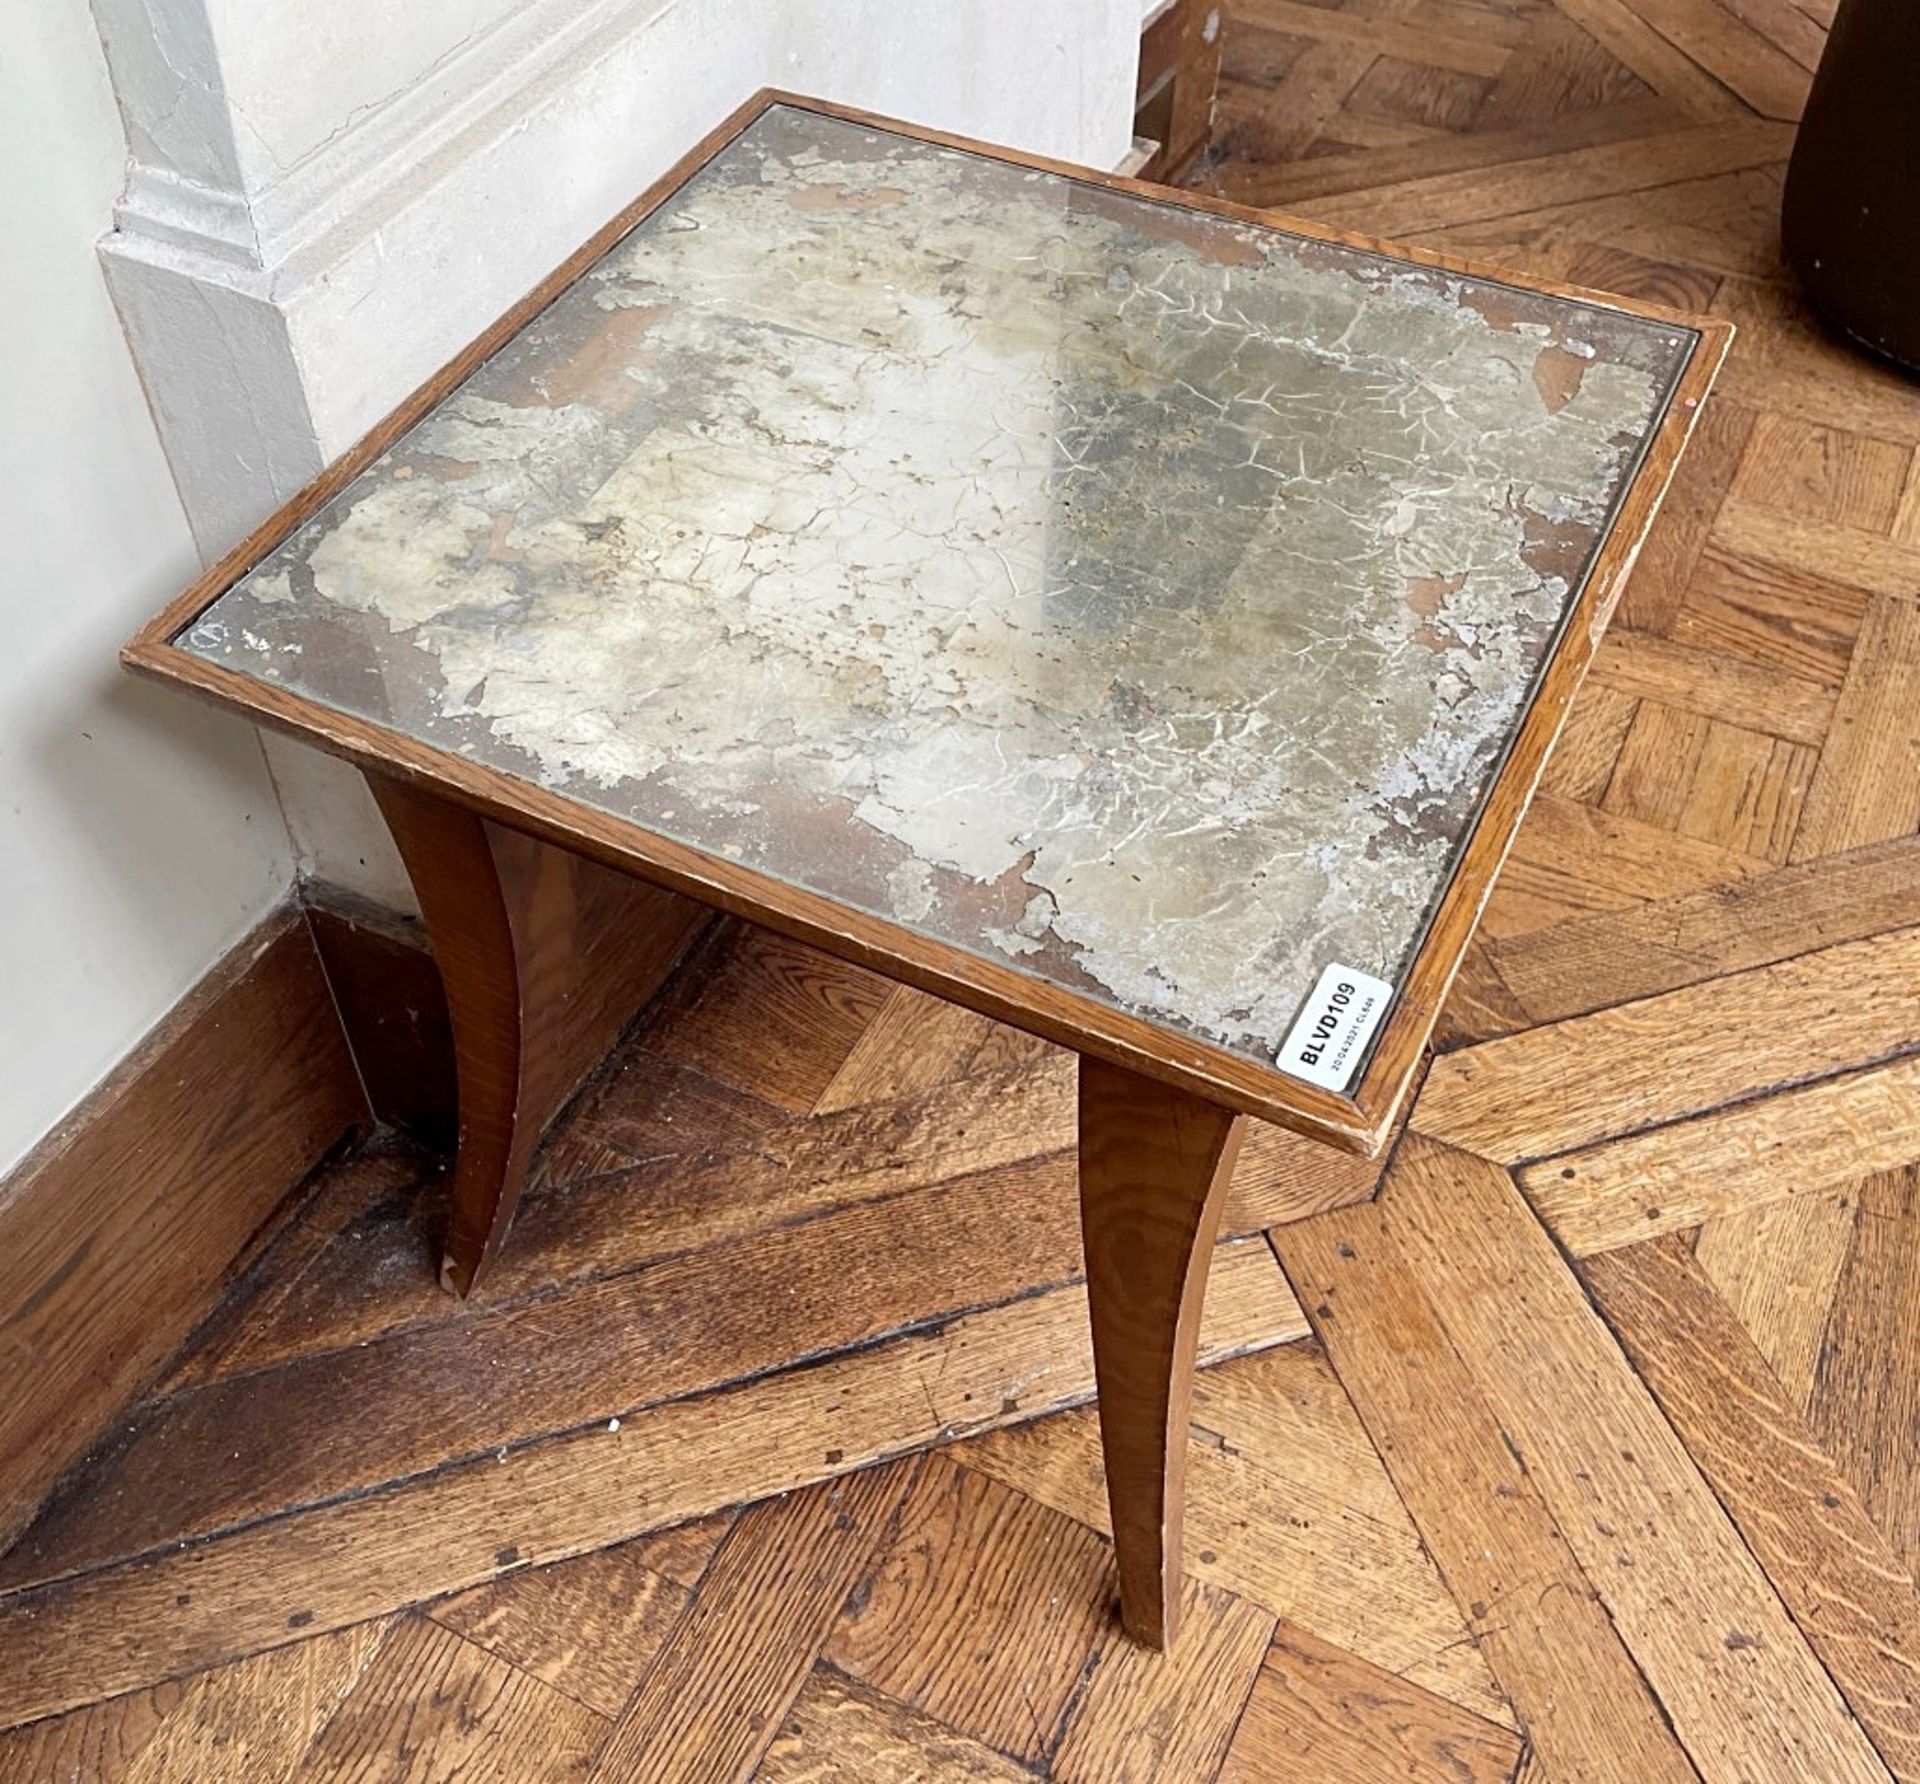 1 x Small Vintage Square Table With A Distressed Mirrored Top - Ref: BLVD109 - CL649 - Location: